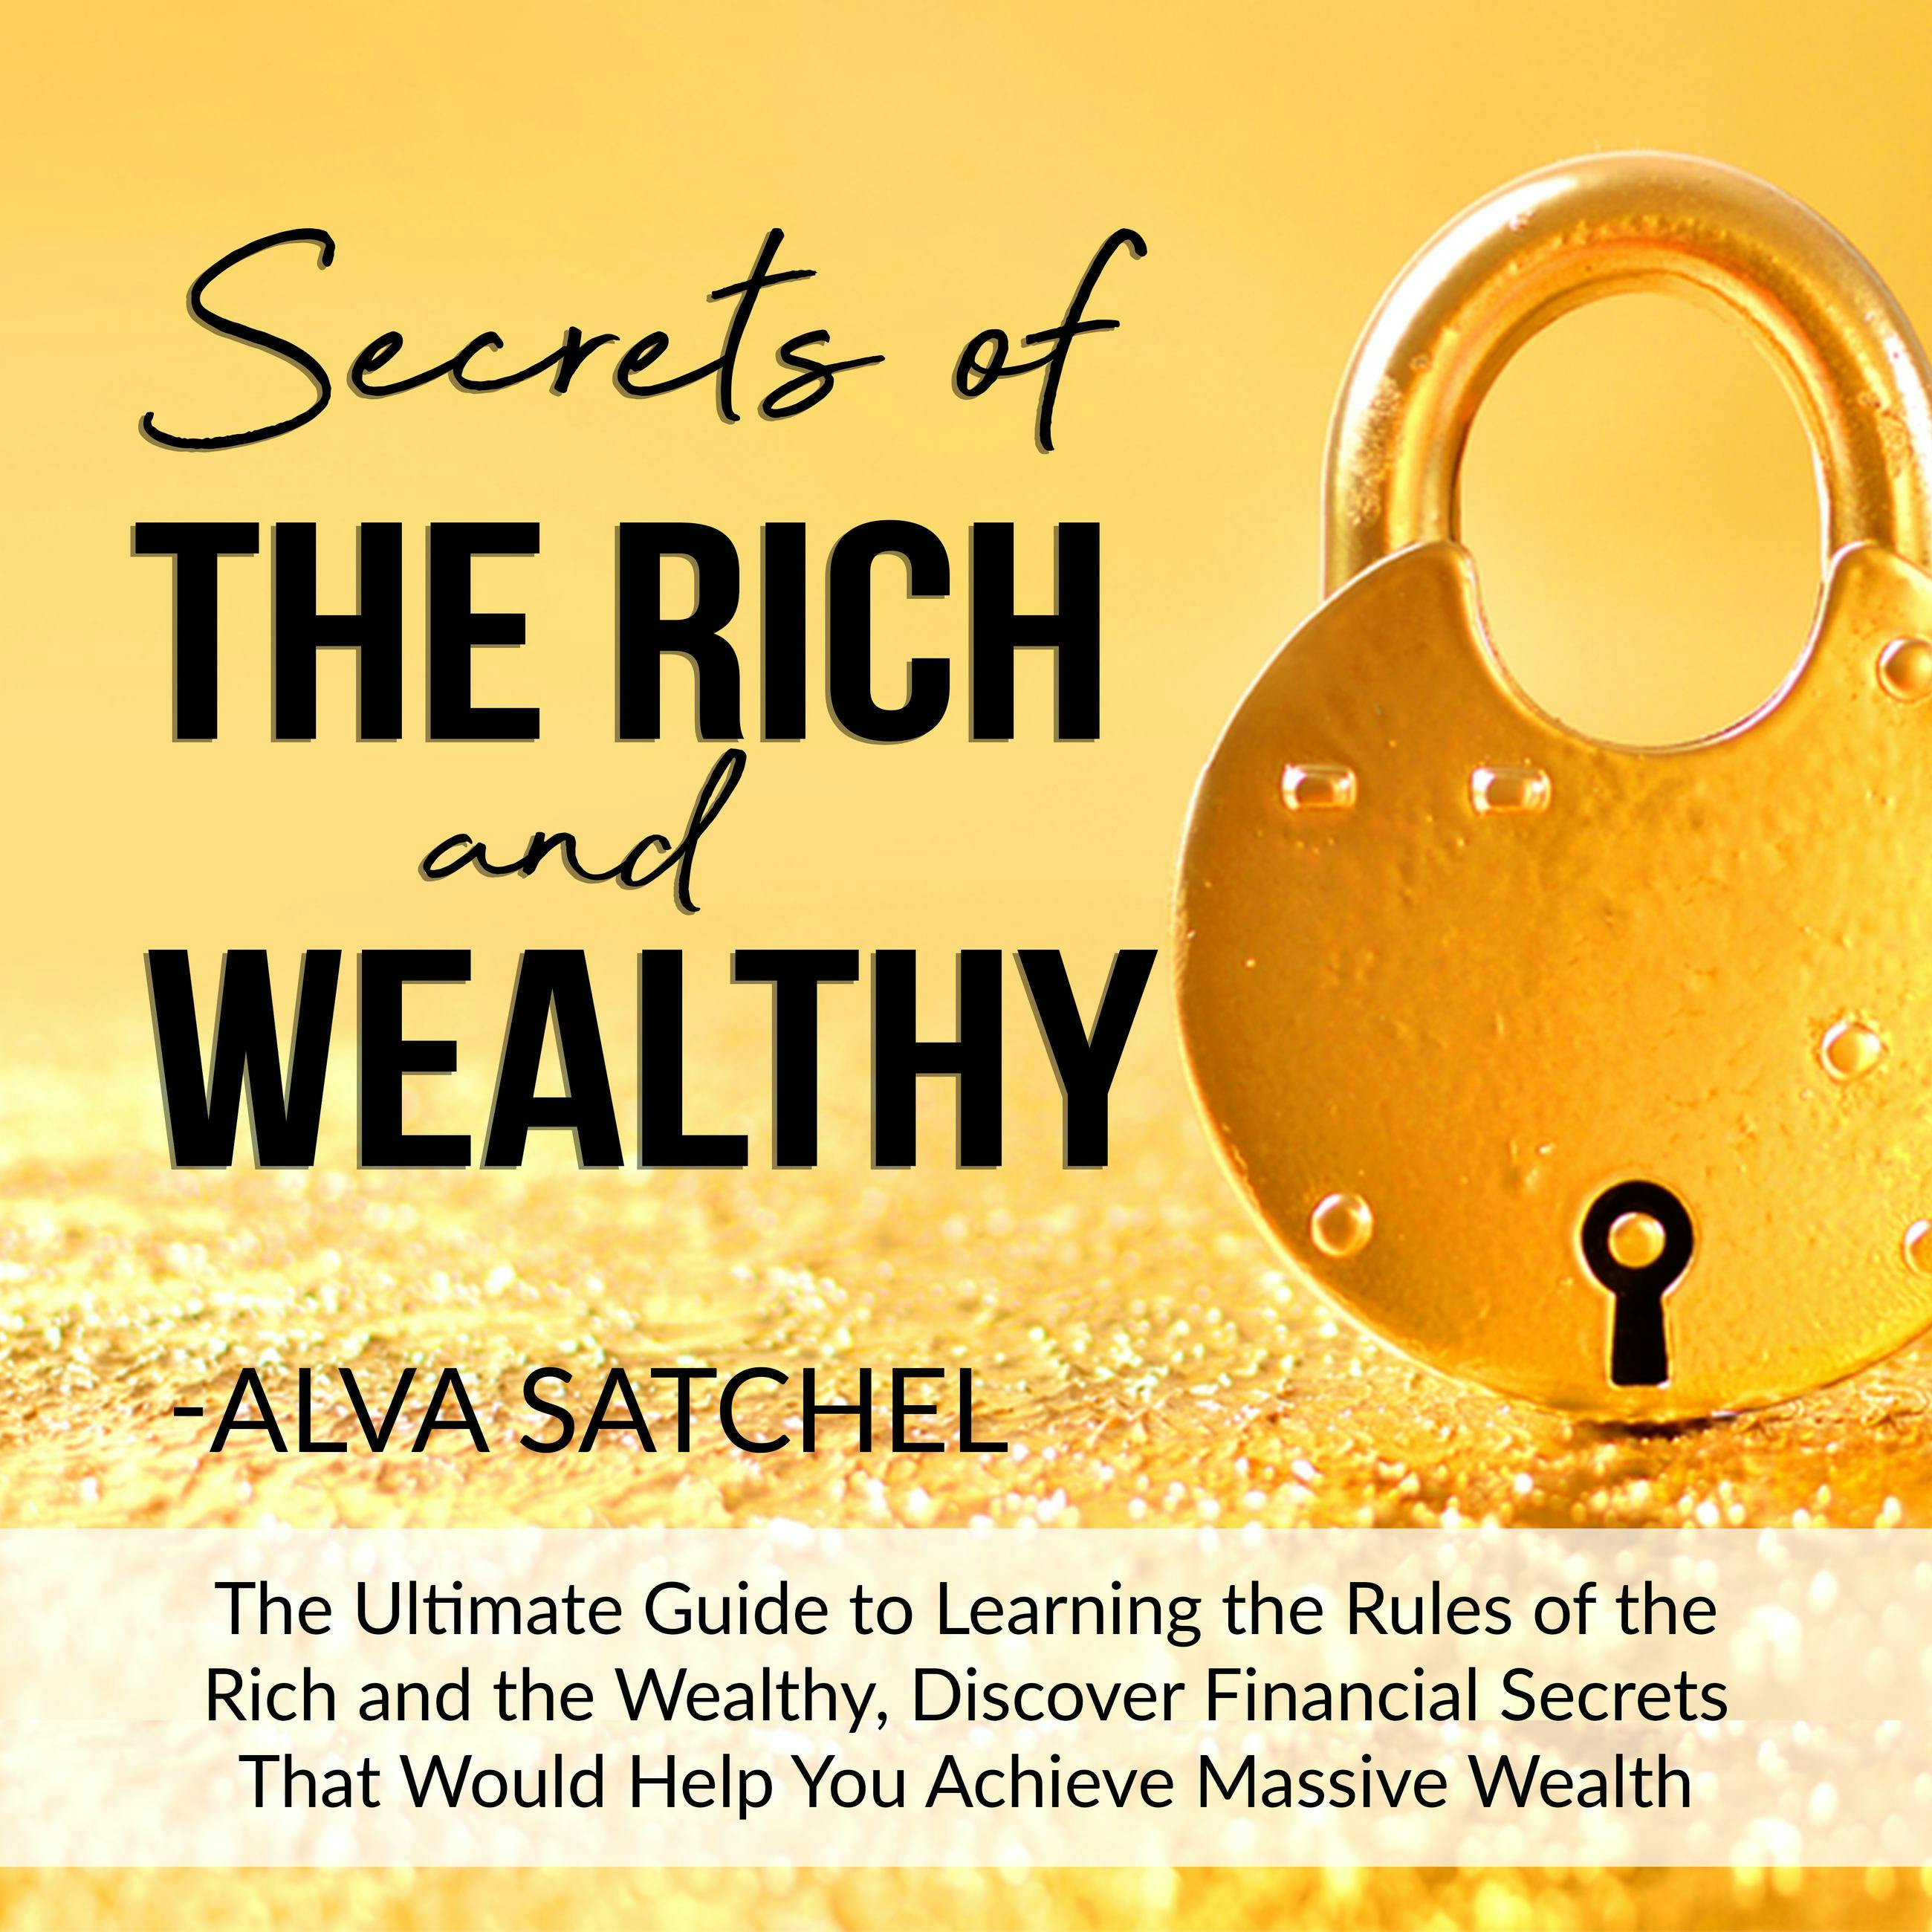 Secrets of the Rich and Wealthy: The Ultimate Guide to Learning the Rules of the Rich and the Wealthy, Discover Financial Secrets That Would Help You Achieve Massive Wealth - Alva Satchel